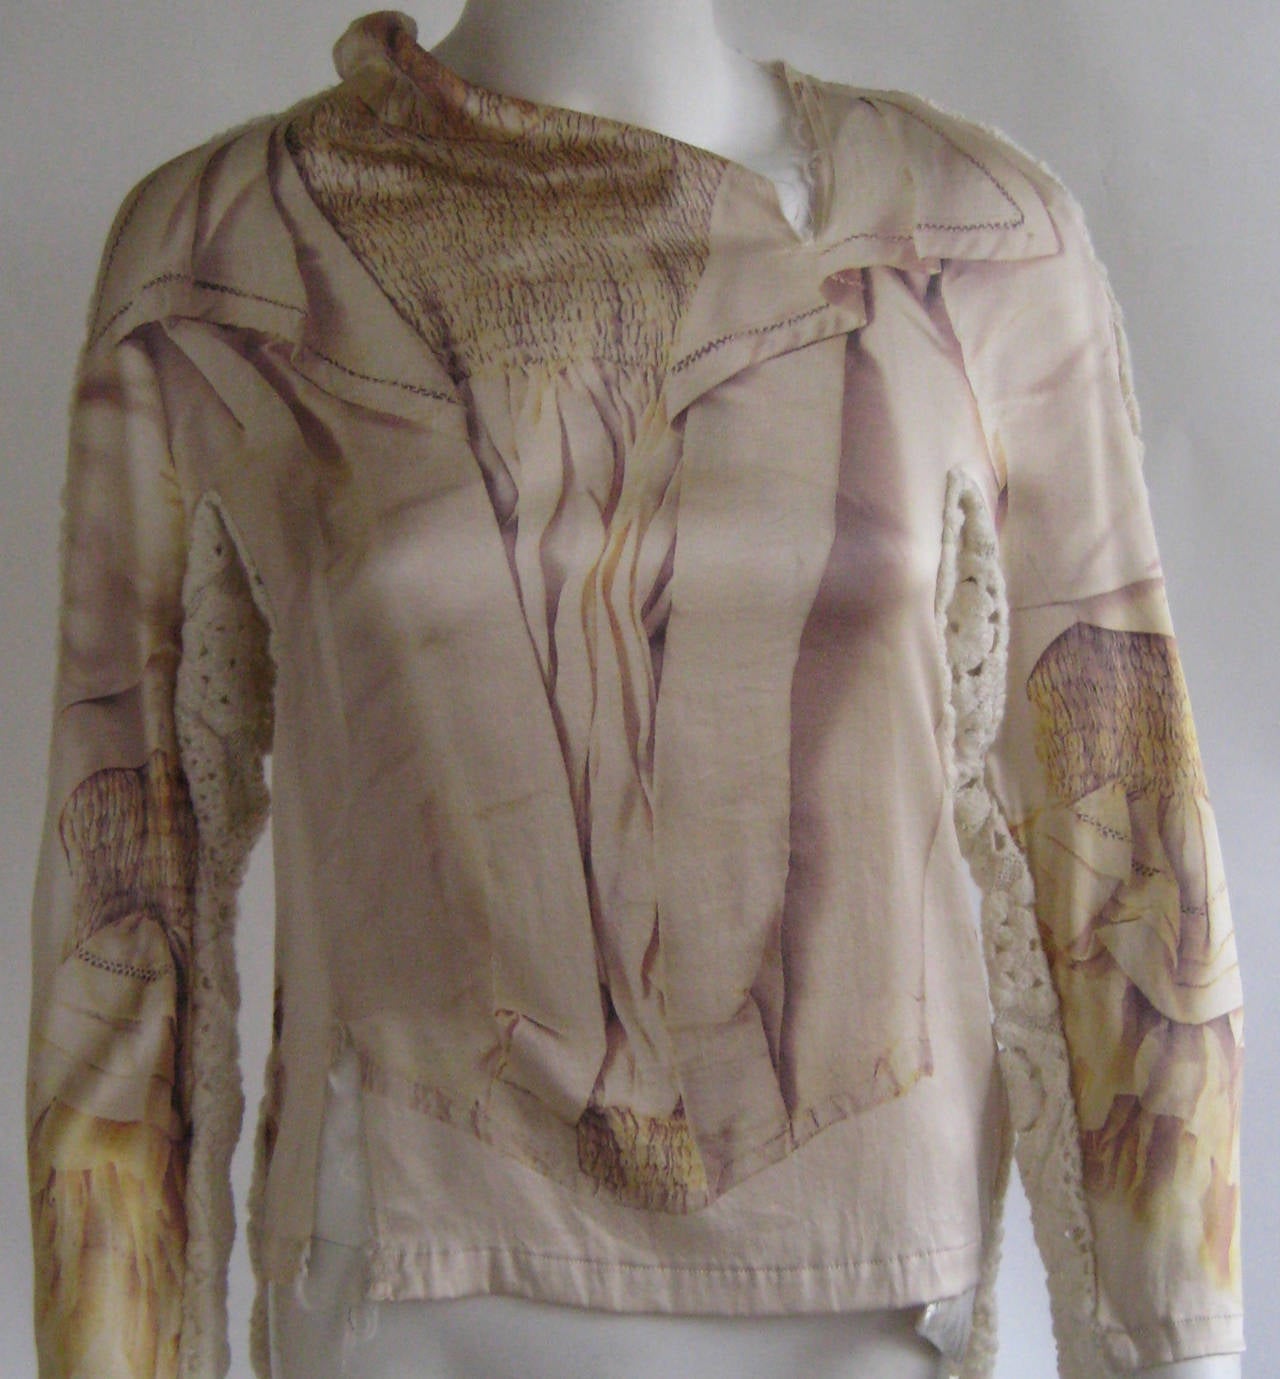 Amazing blouse form the Broken Brides Collection
100% silk and 100% wool
New with original store tags and extra wool fabric